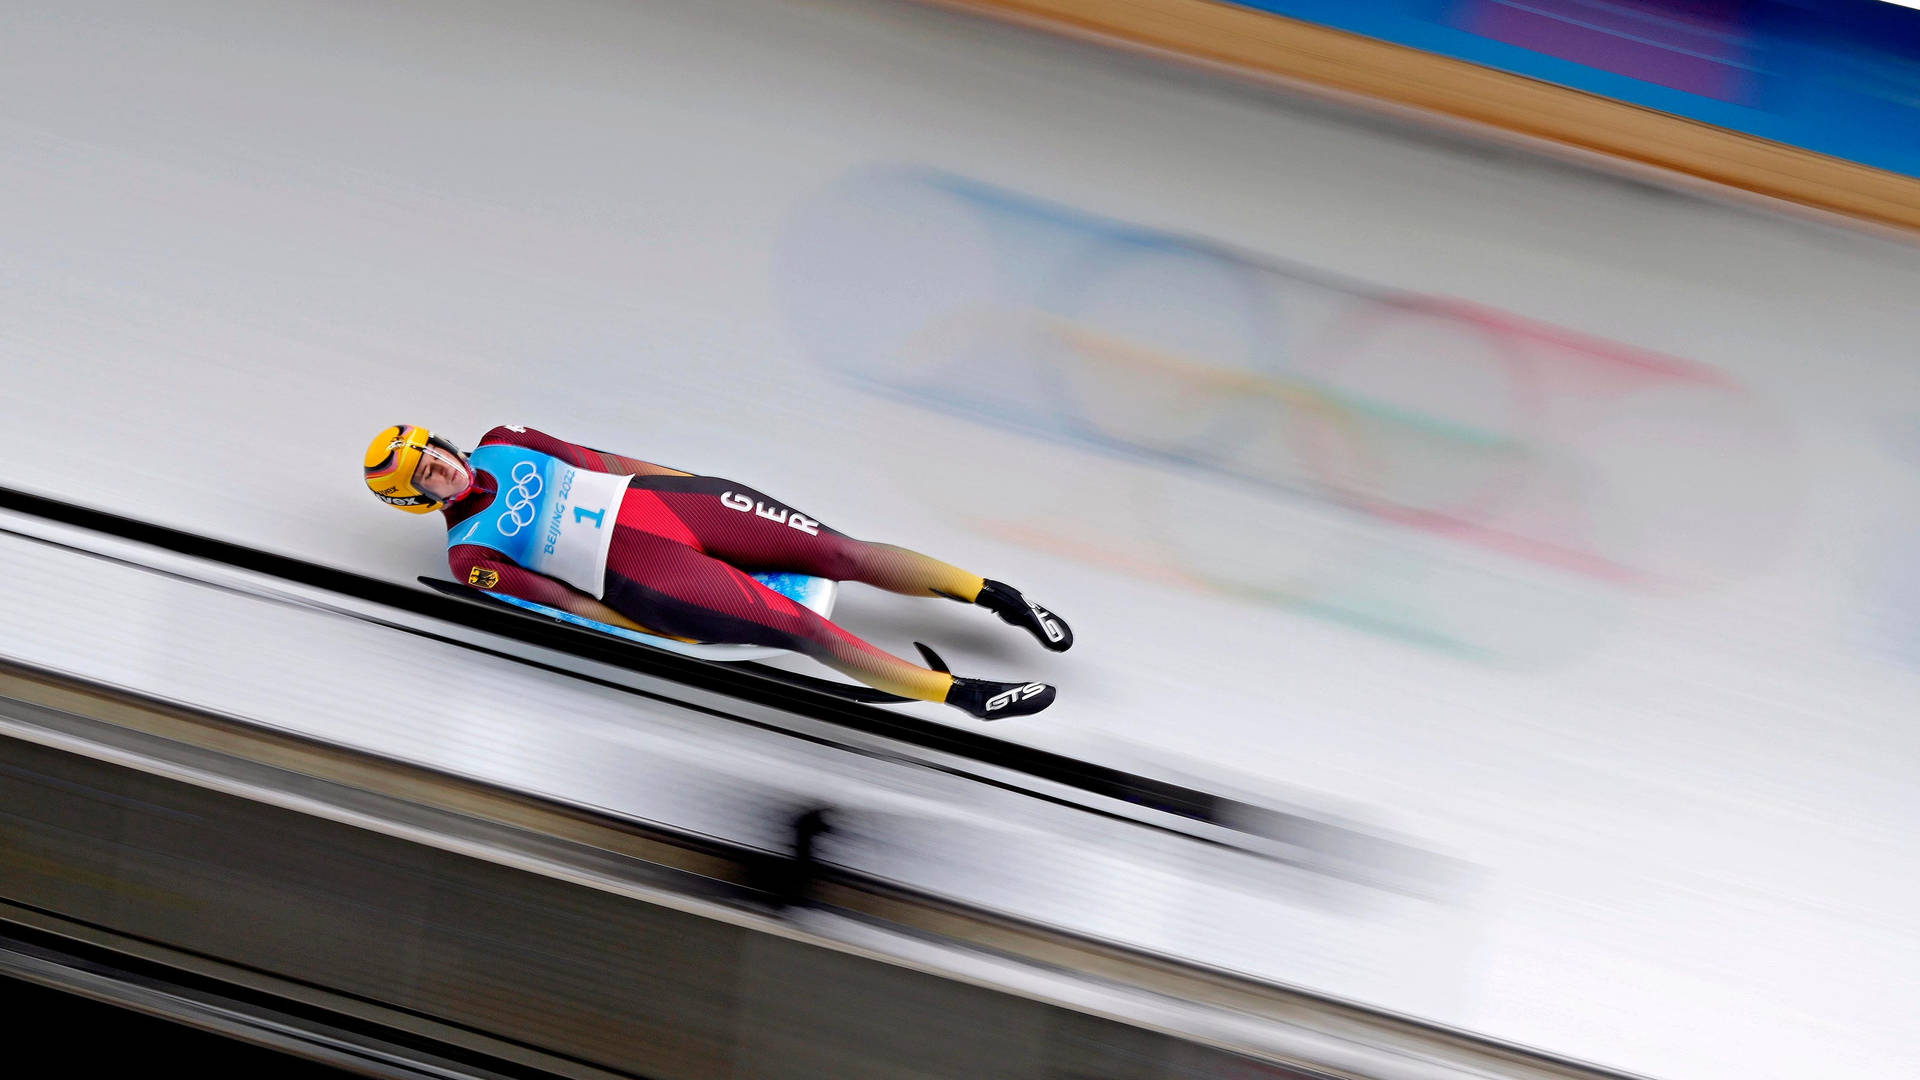 Fearless Luge Athlete in High-Speed Action Wallpaper